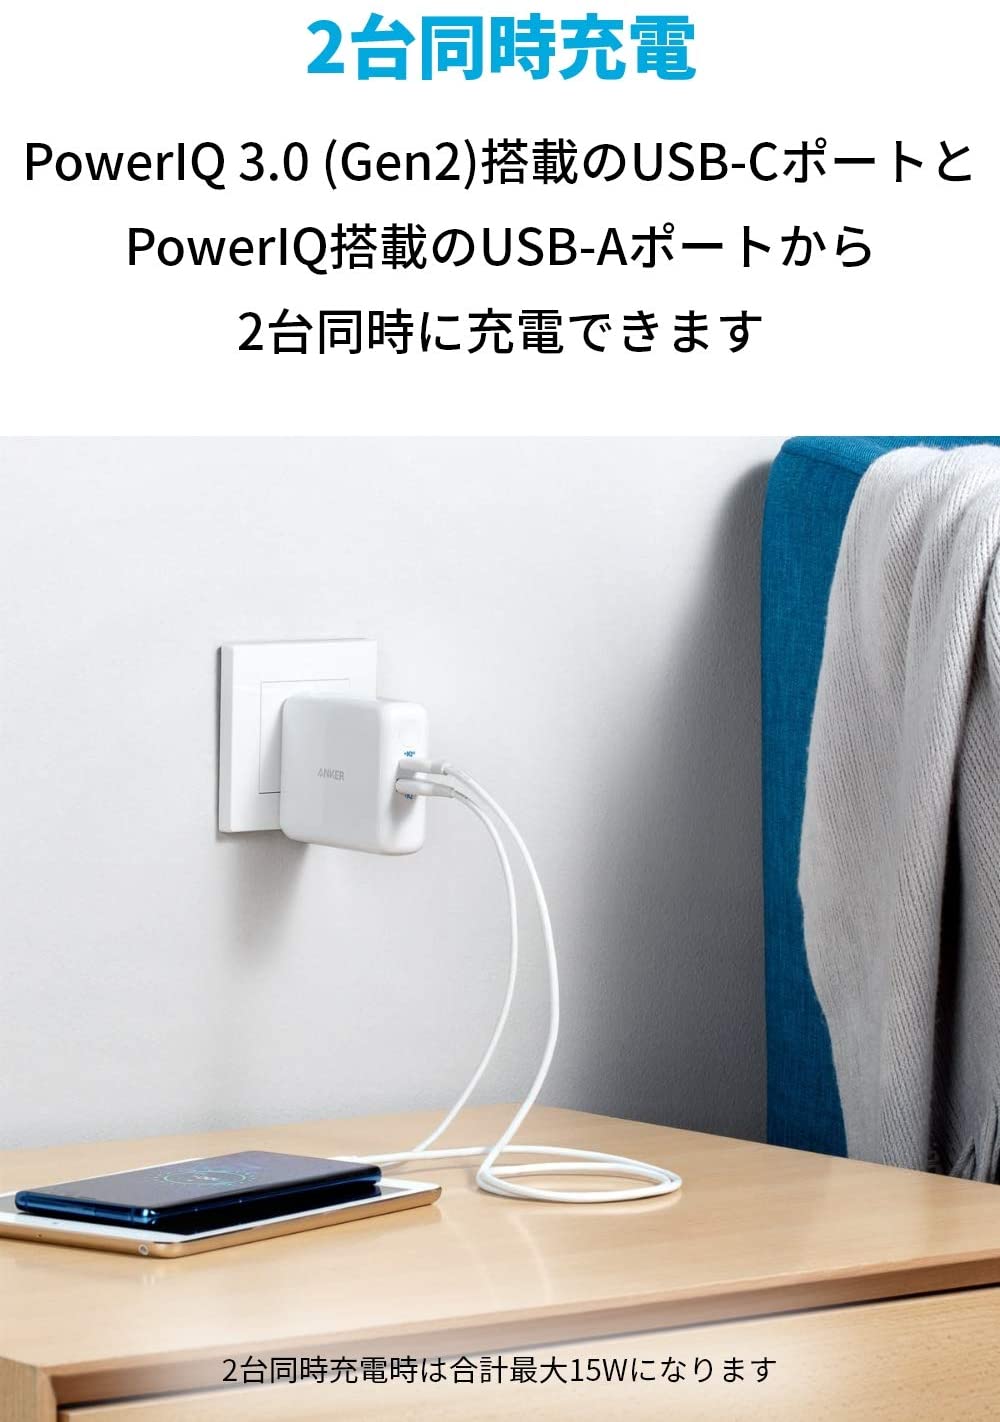 Anker PowerCore Fusion lll 5000